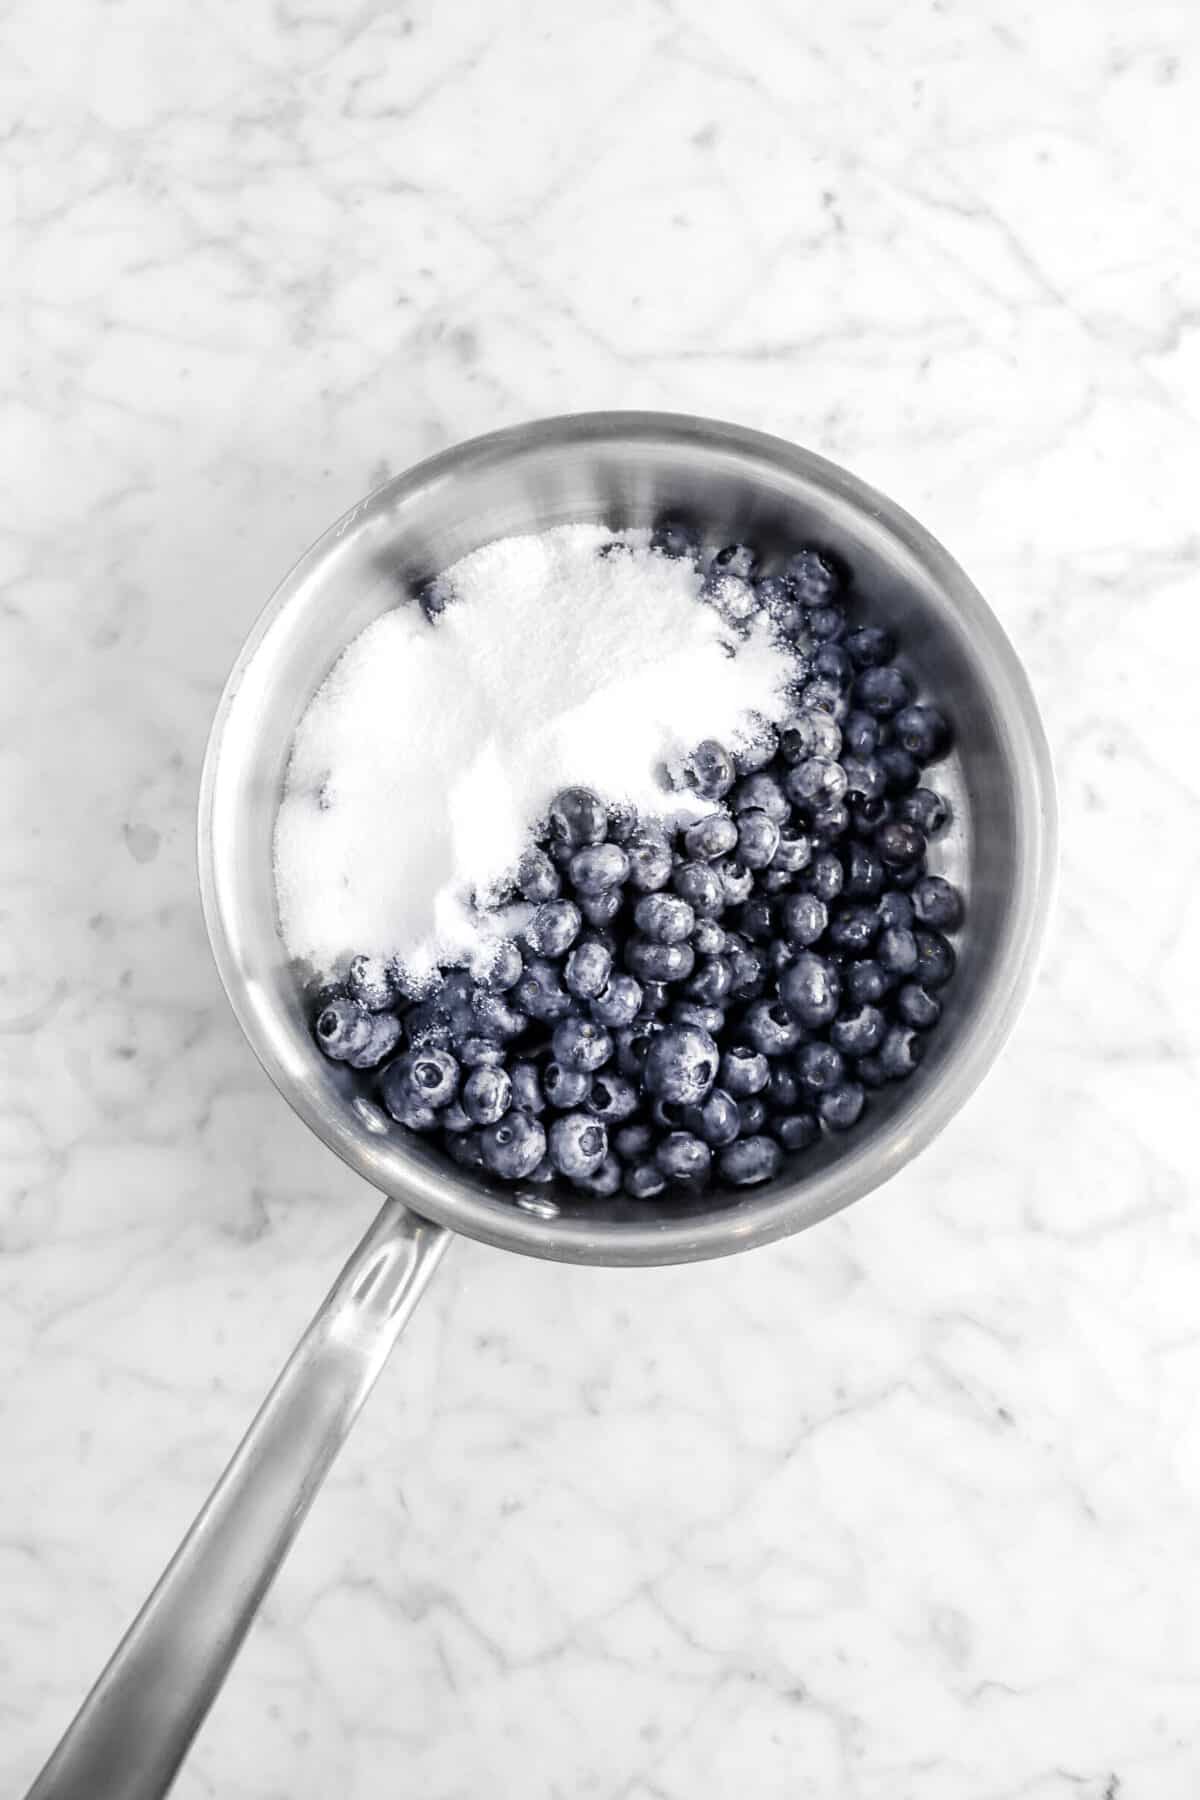 blueberries, lemon juice, and sugar in small pot